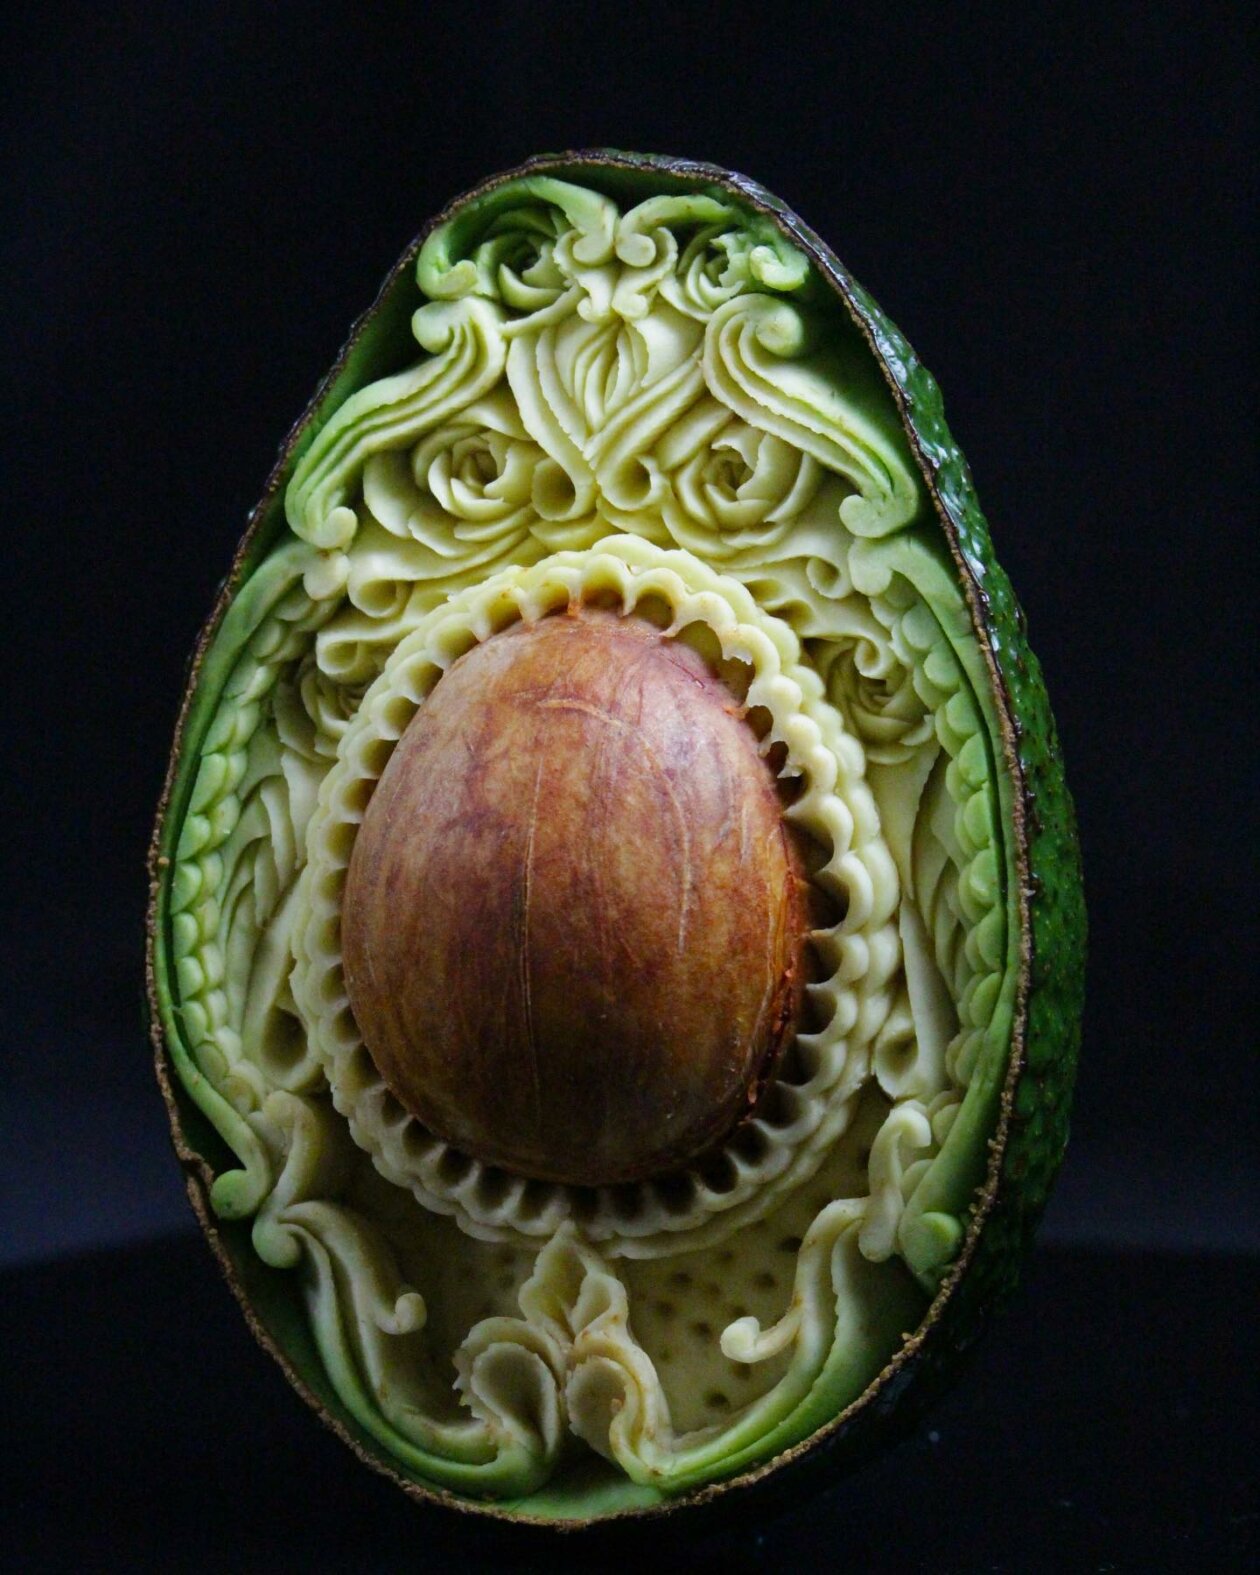 Superb Fruit And Vegetable Carvings By Daniele Barresi 7